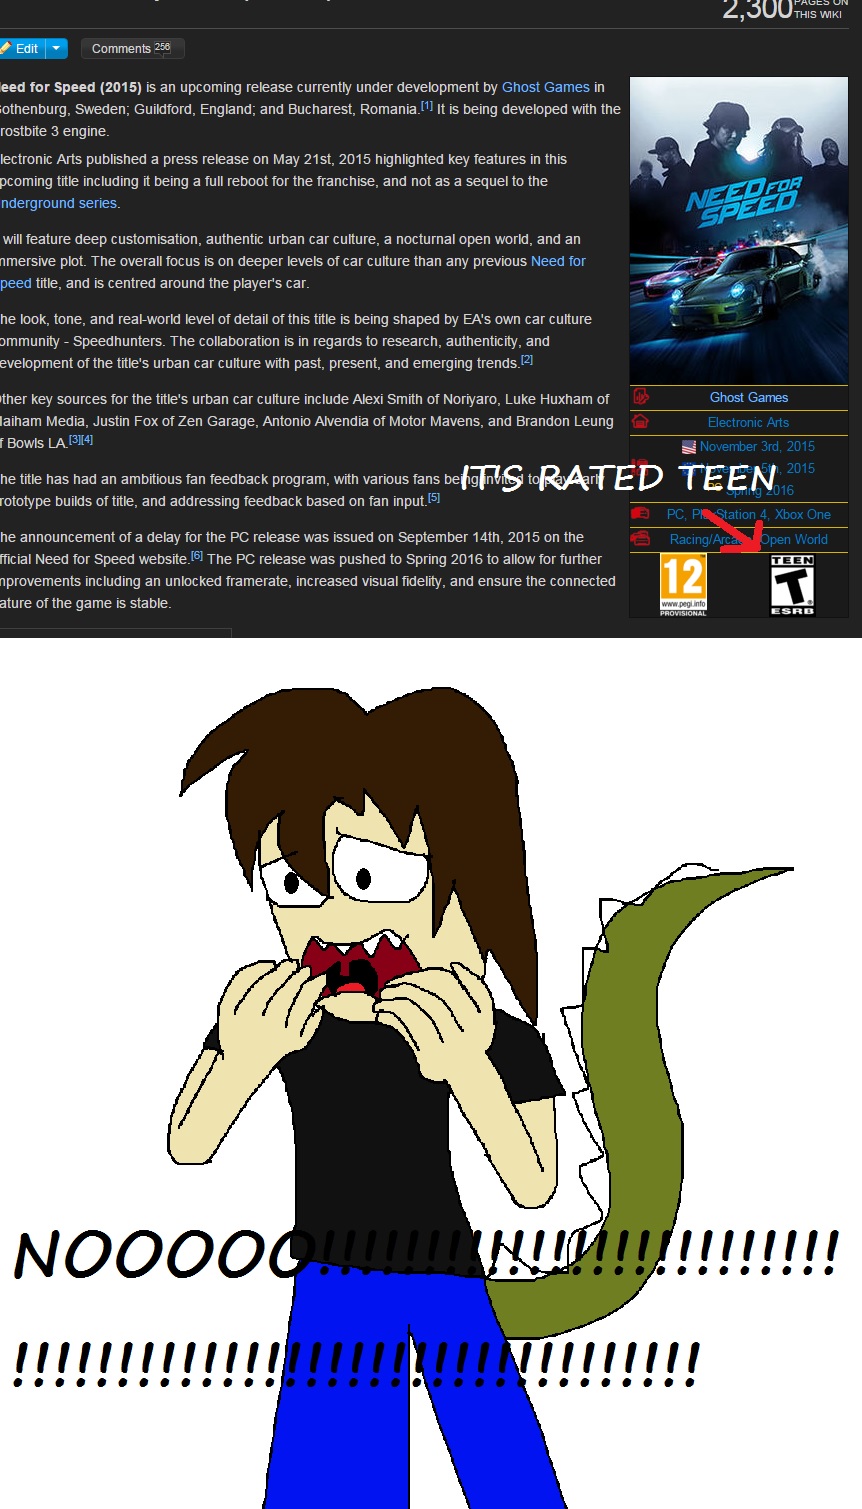 My reaction to Need for Speed (2015) is rated Teen by Rainbow-Dash-Rockz